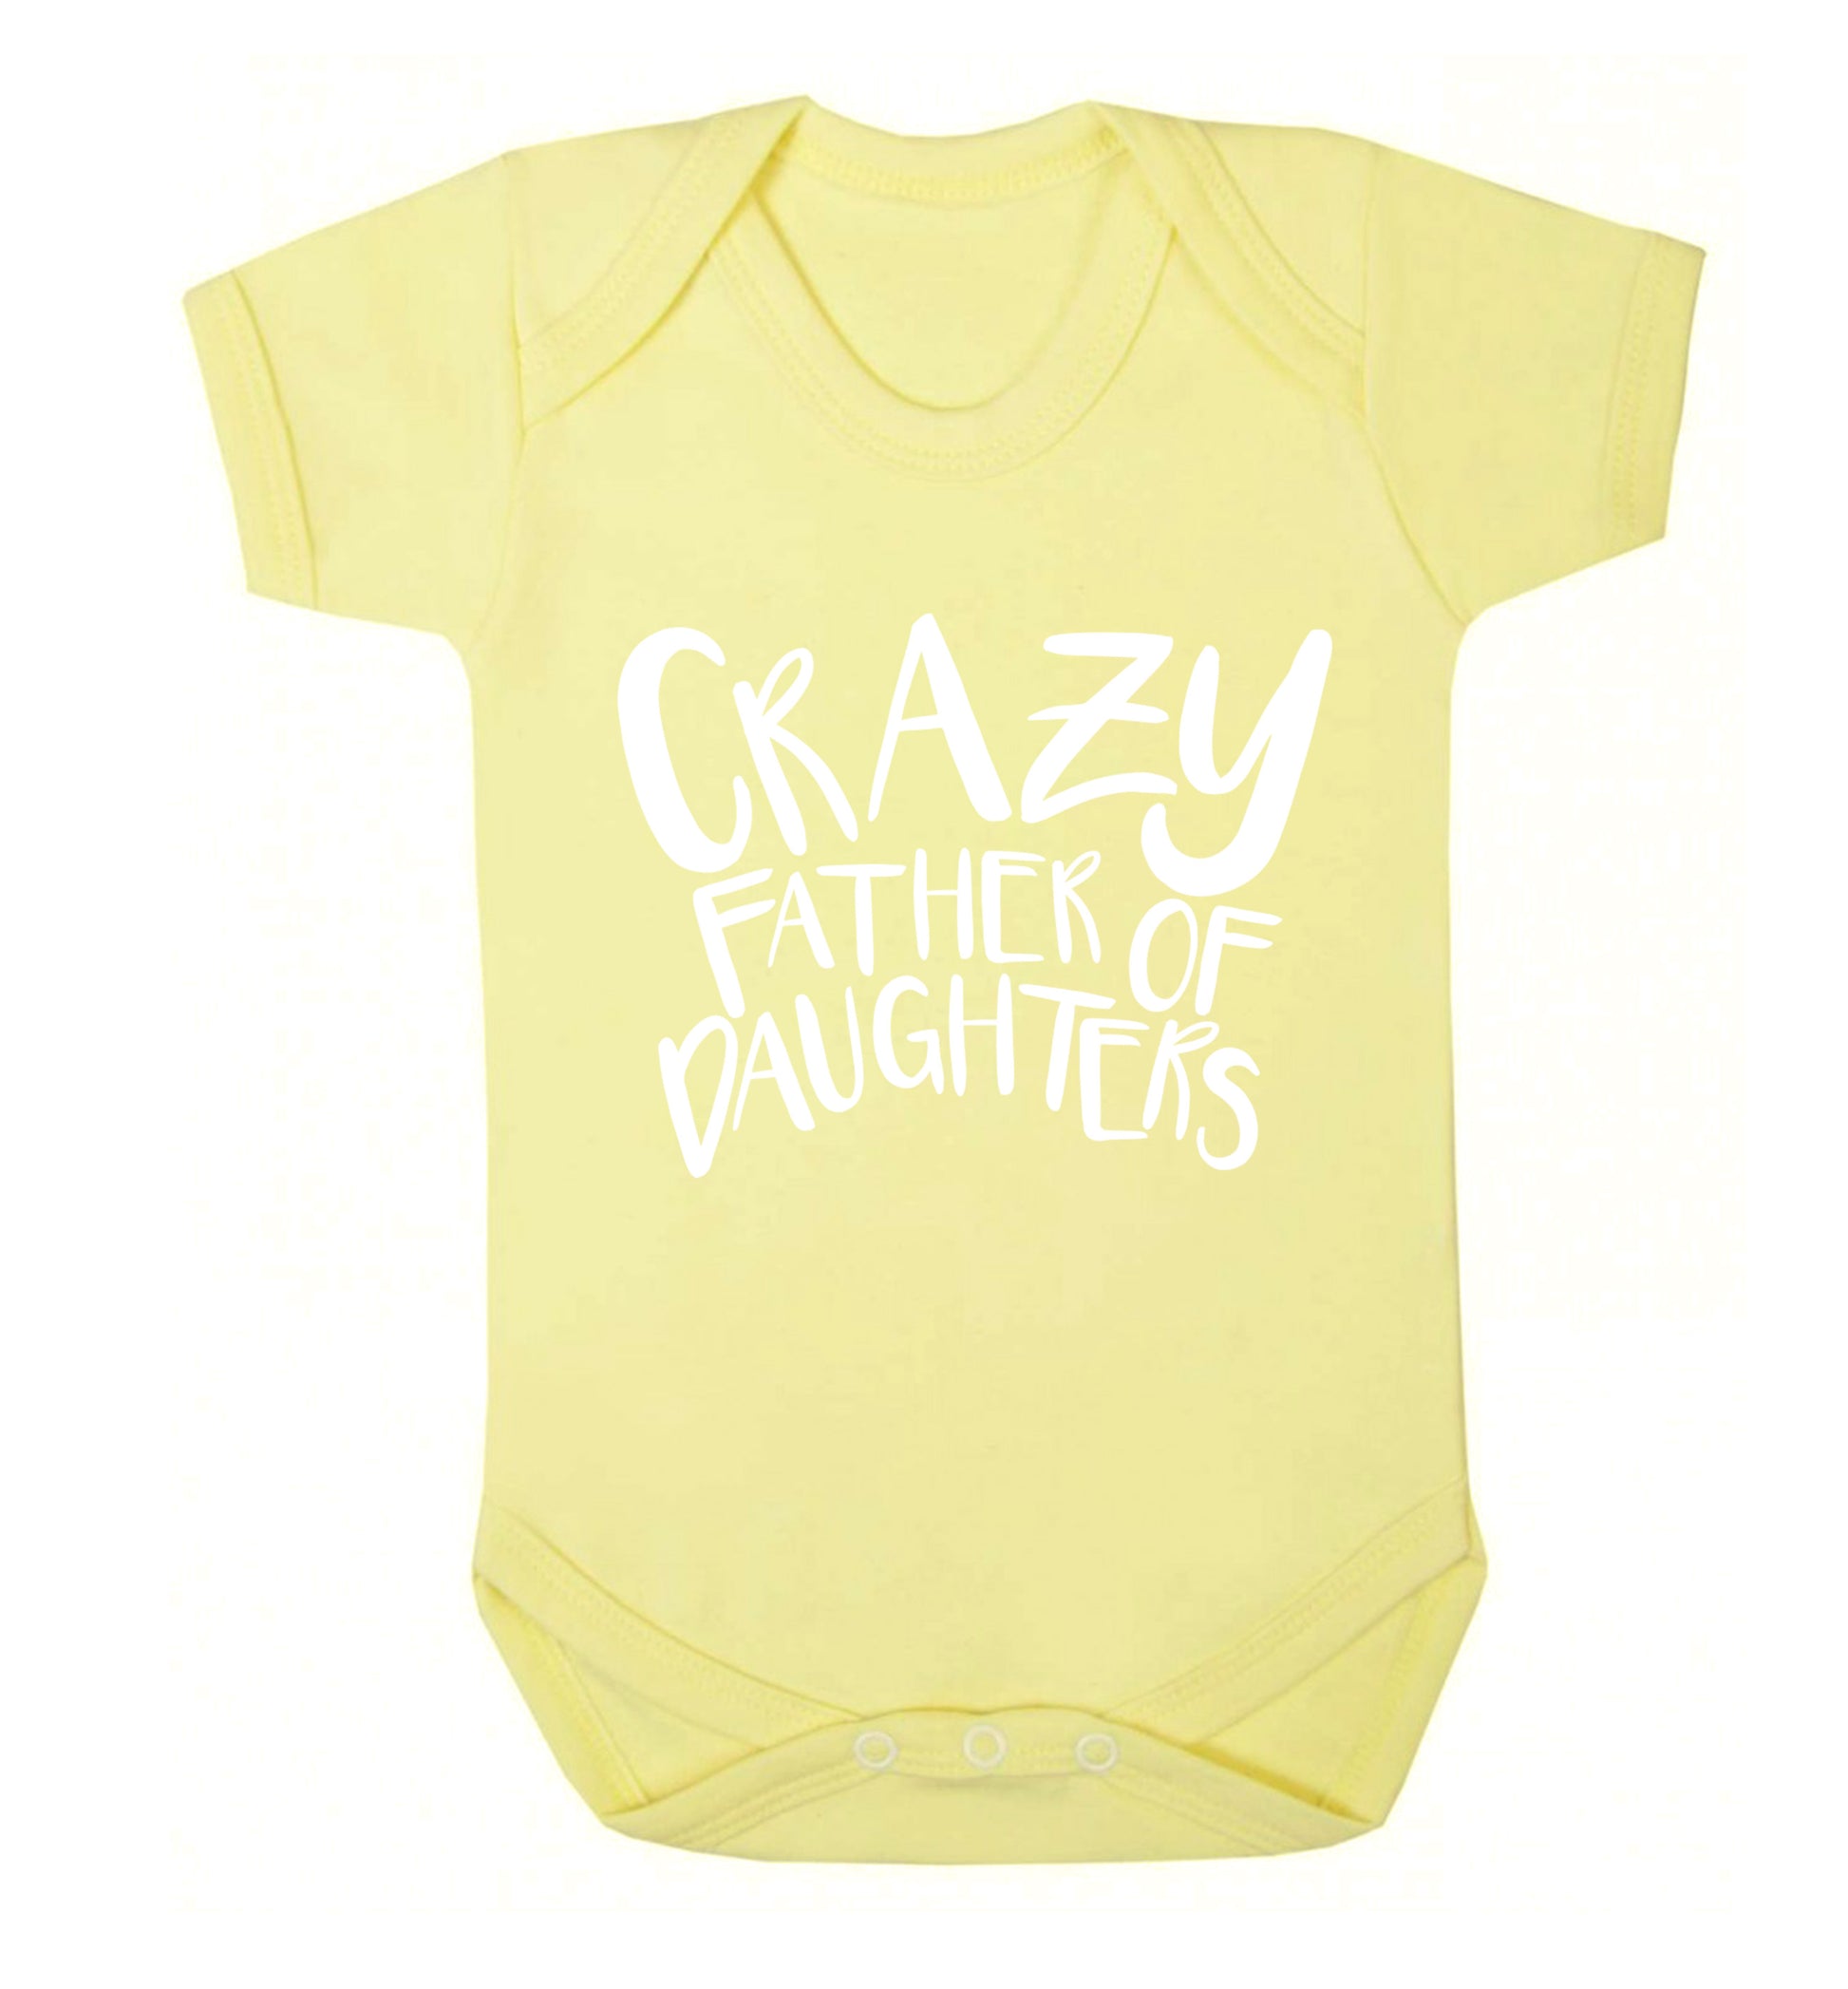 Crazy father of daughters Baby Vest pale yellow 18-24 months